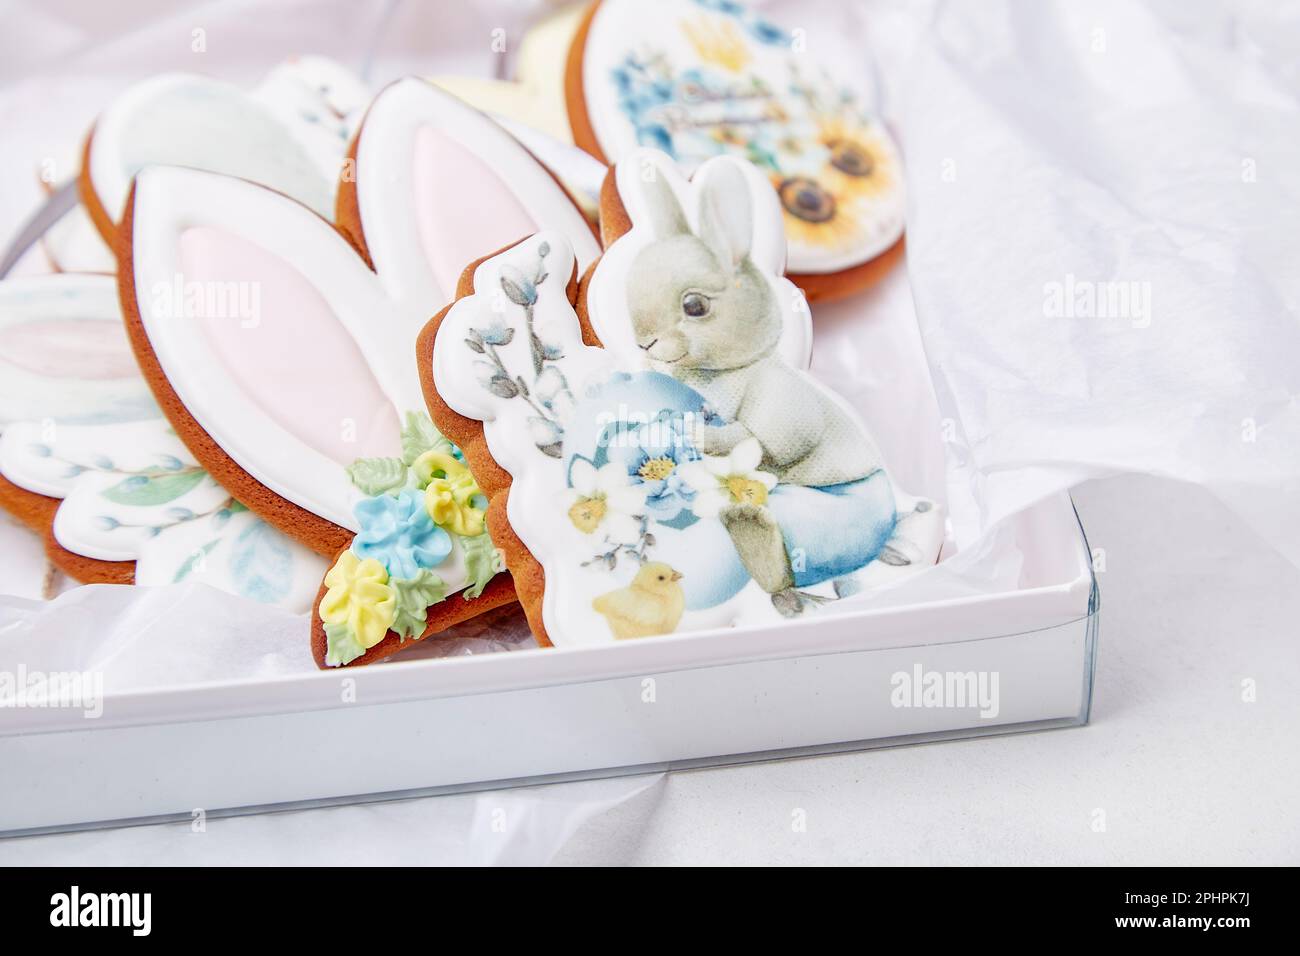 Pastel glazed decorated gift box with Easter cookies close up. Springtime cozy aesthetics background. Stock Photo